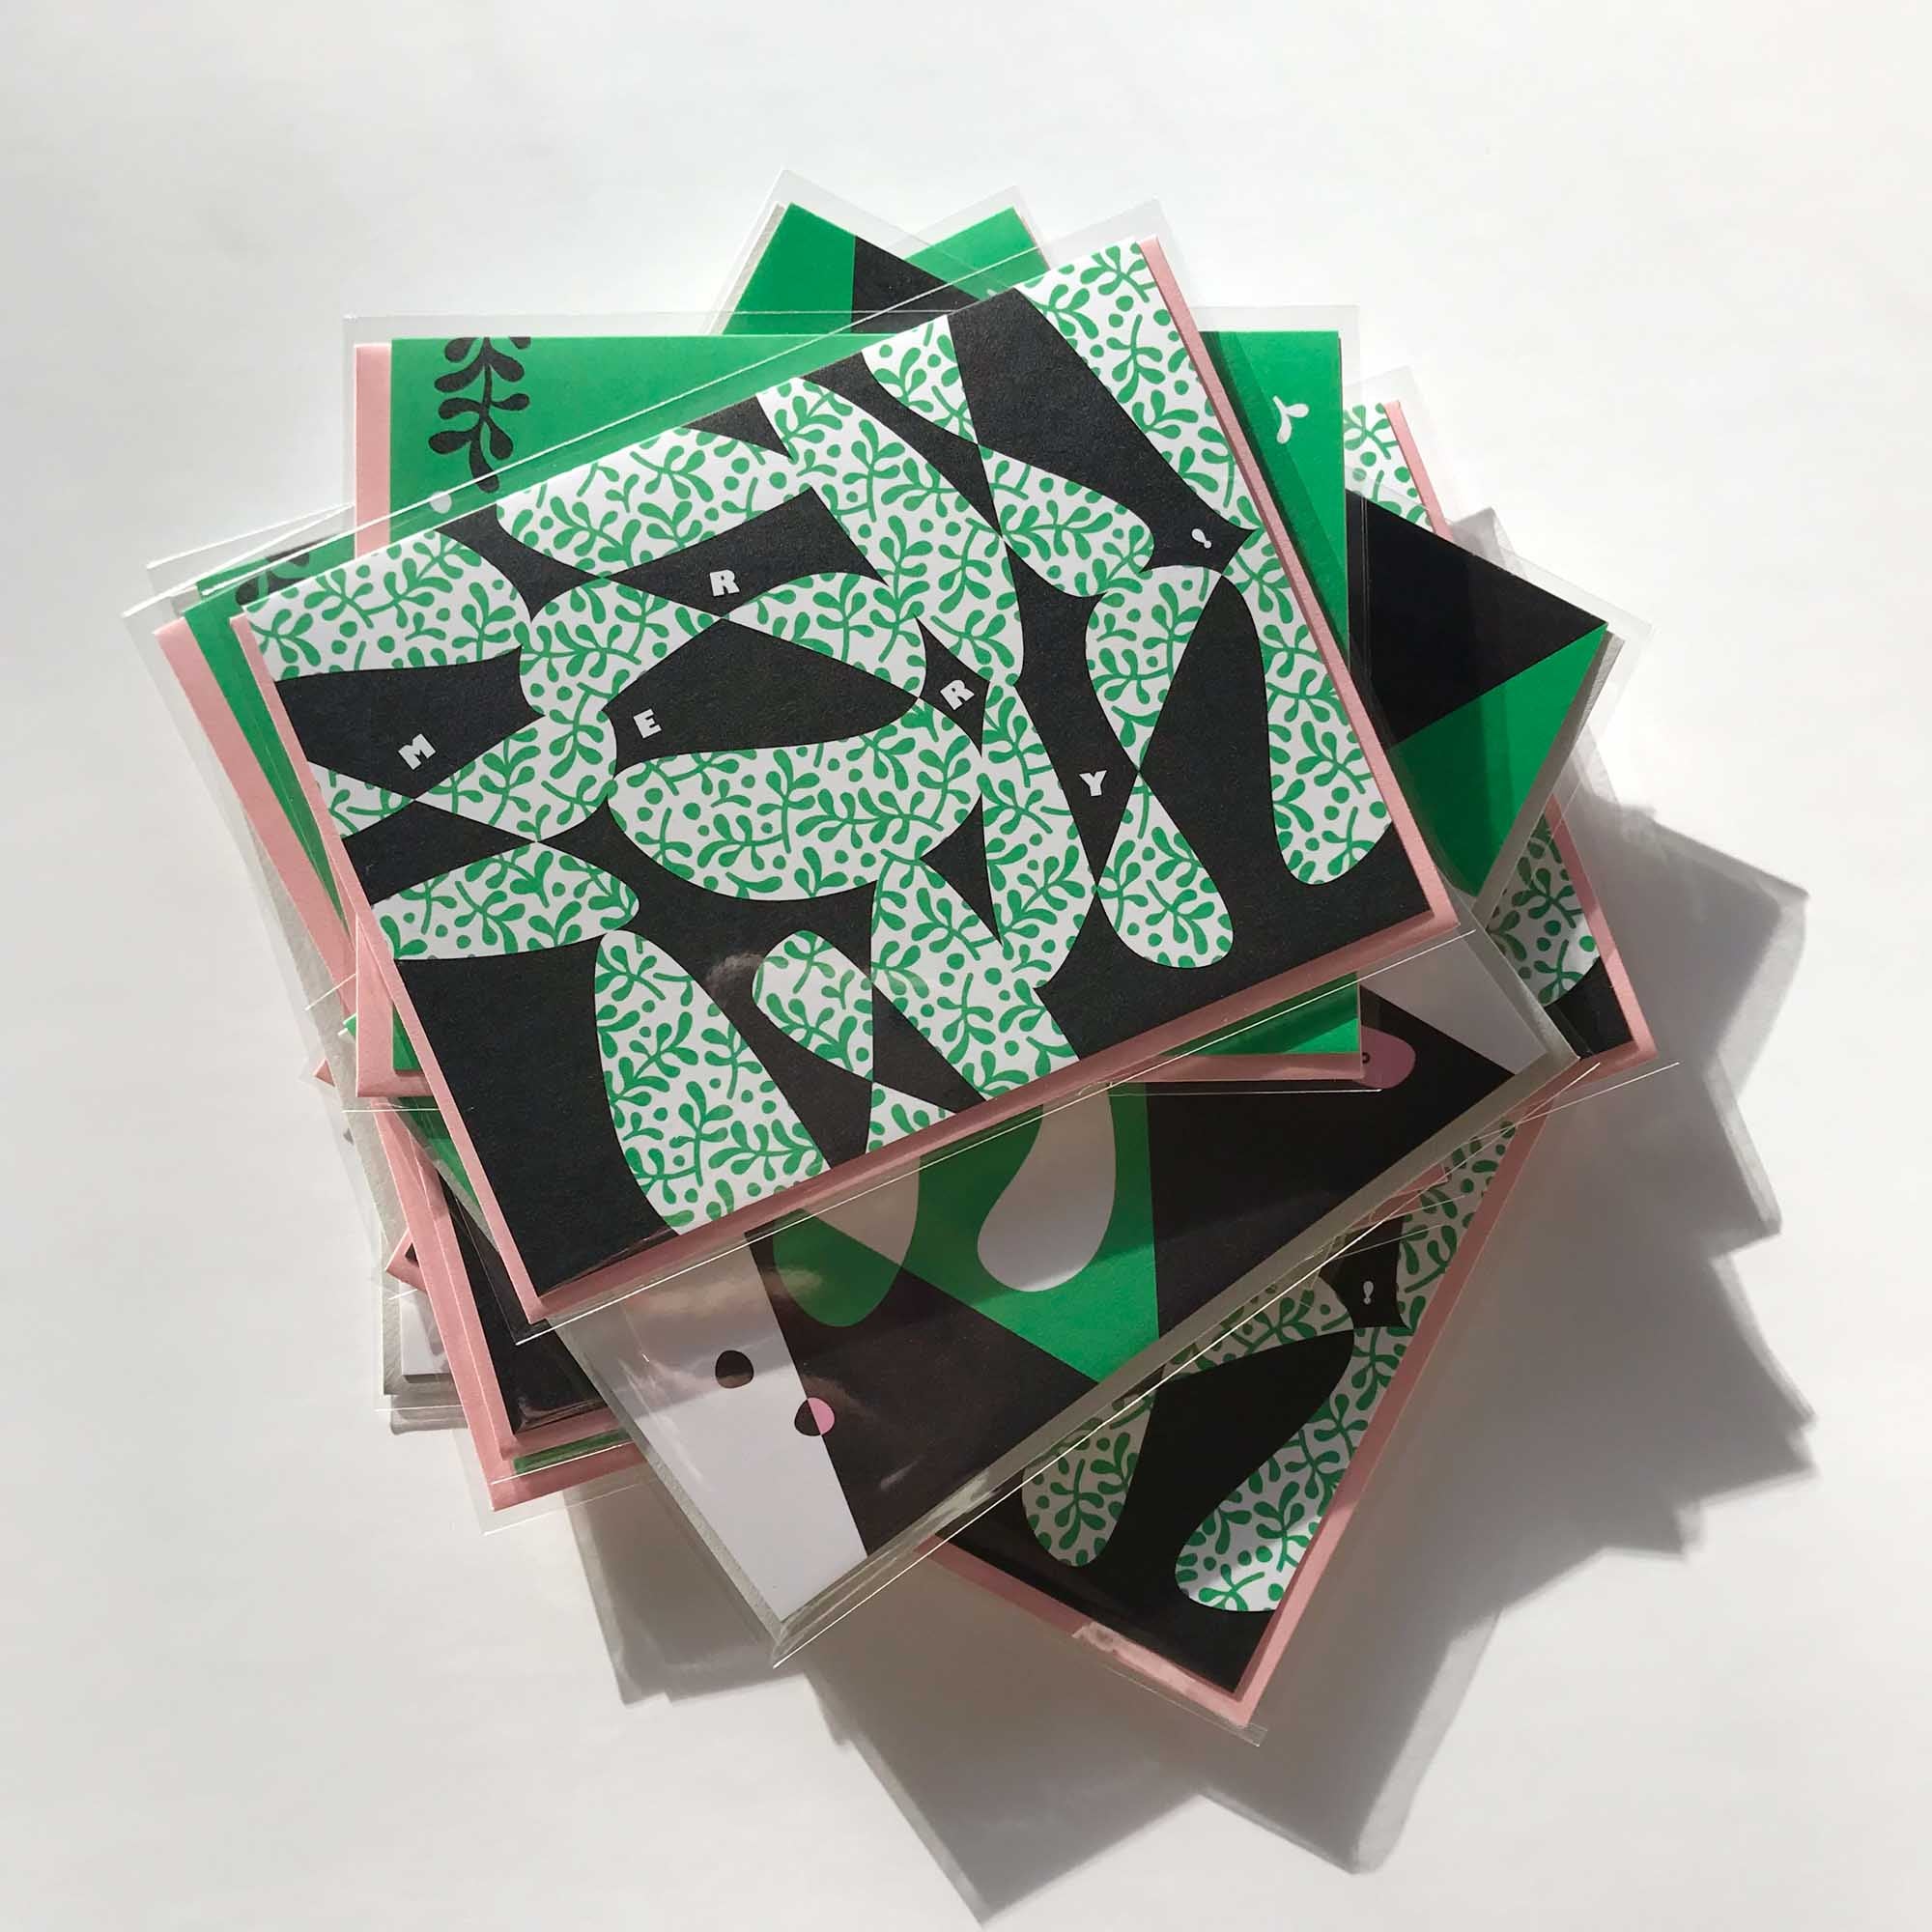 A pile of pink and green retro, mid-century inspired holiday cards by @mydarlin_bk